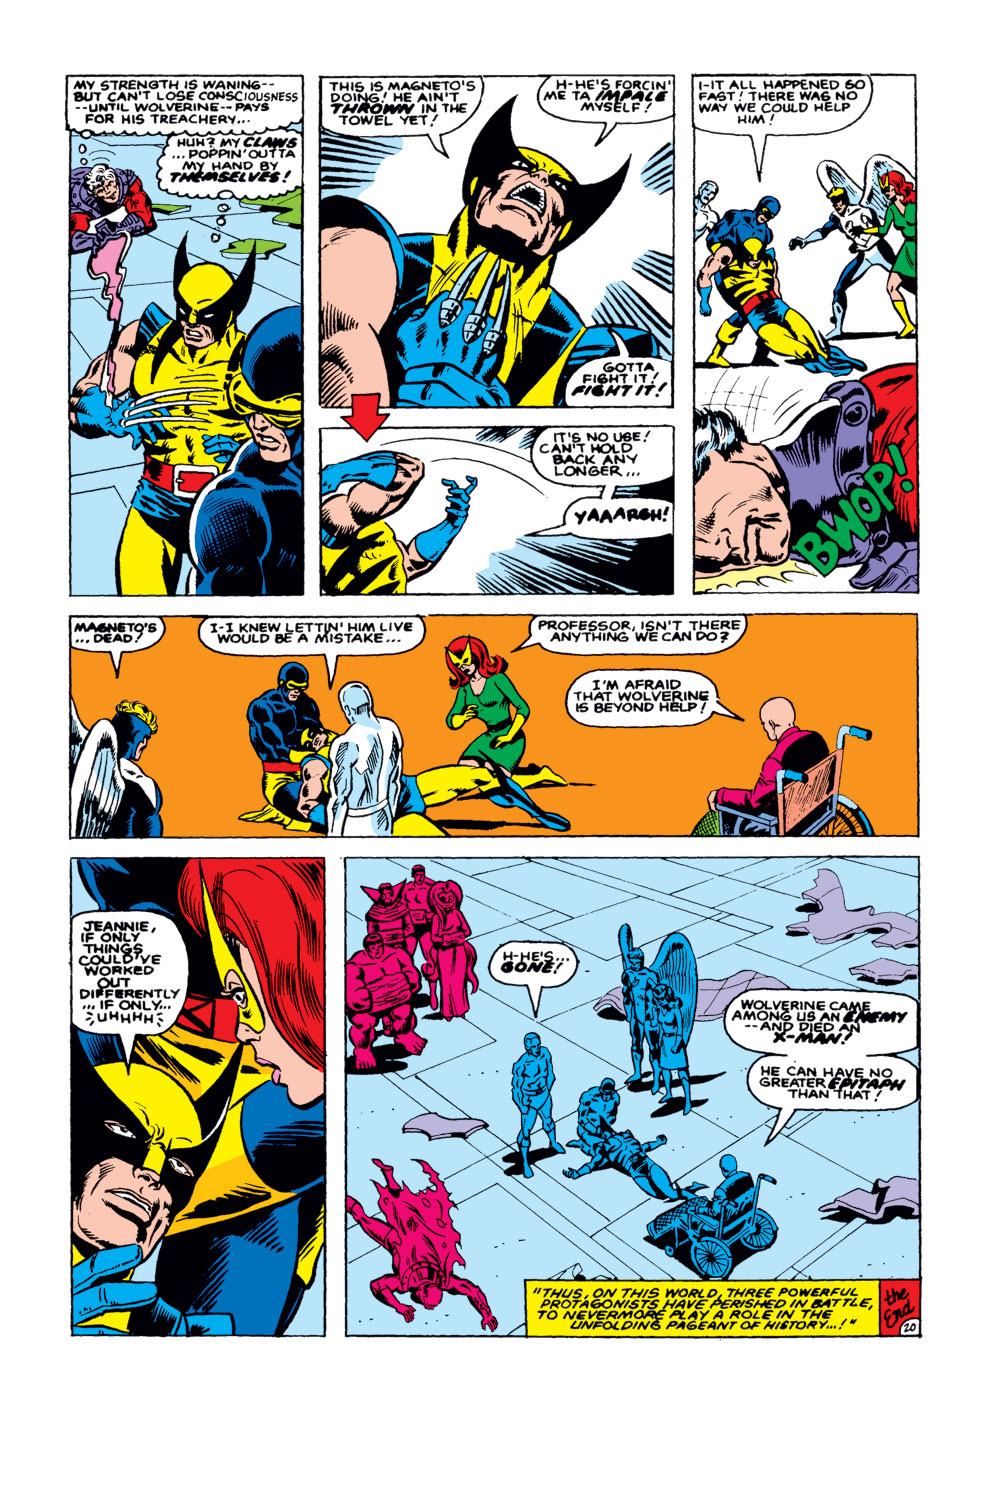 What If? (1977) issue 31 - Wolverine had killed the Hulk - Page 21